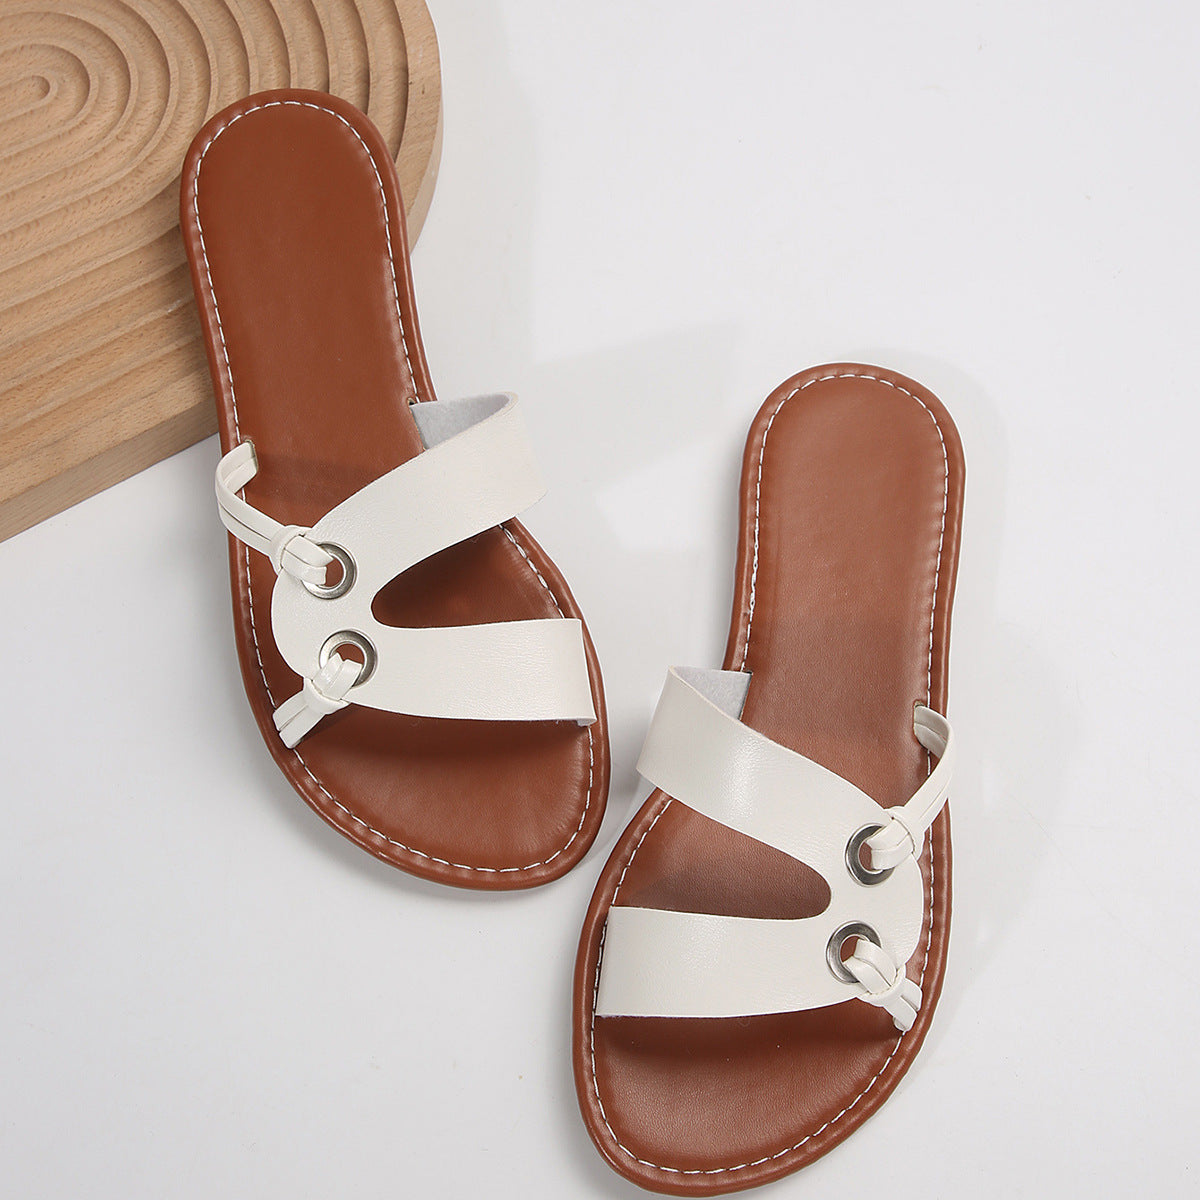 Round Toe Flat Sandals Summer Fashion Casual Non-slip Slides Shoes For Women